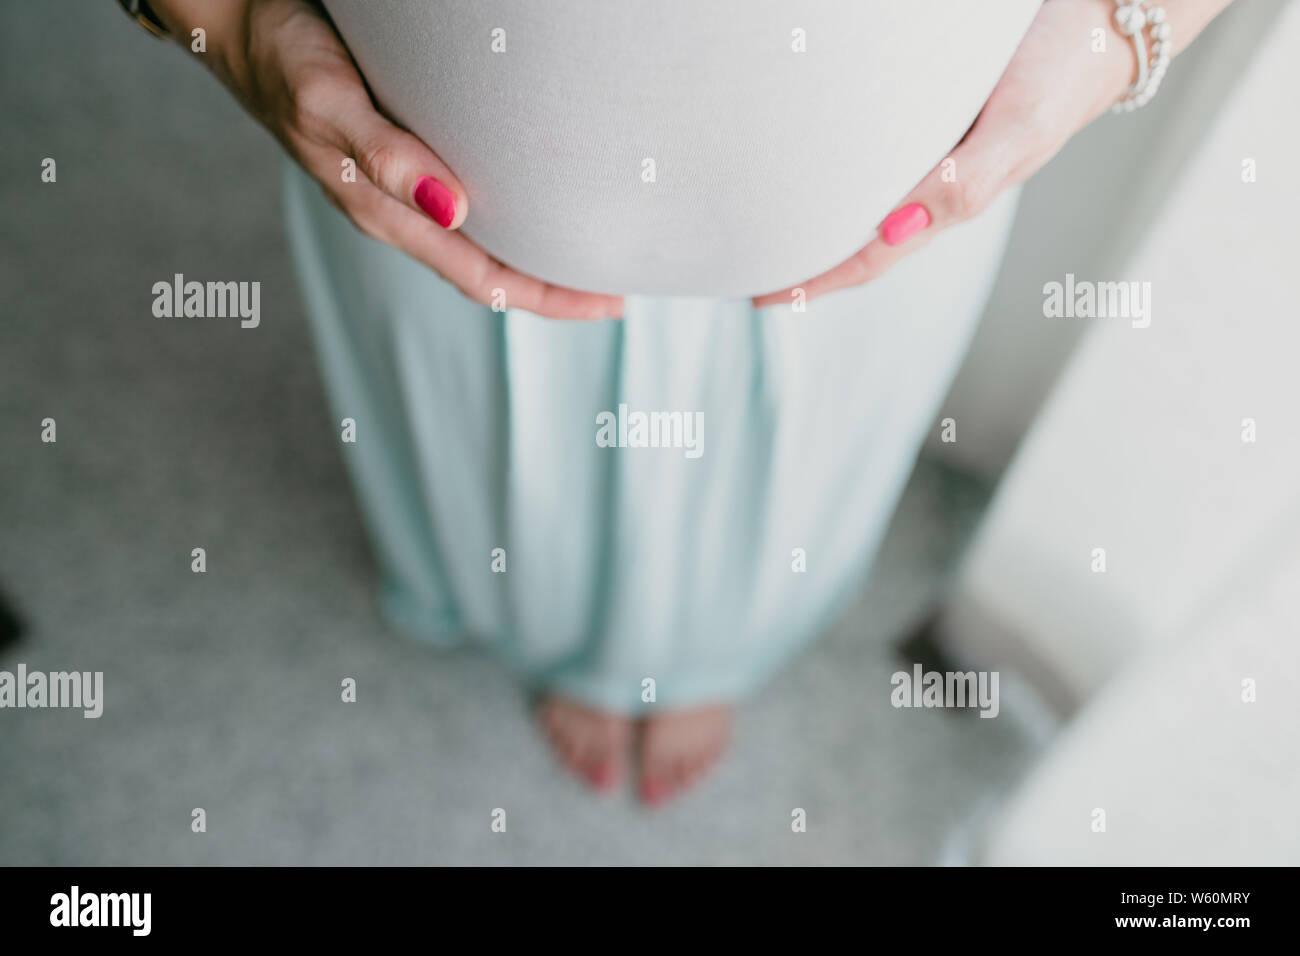 Belly and hands of pregnant woman, in the background unfocused feet Stock Photo